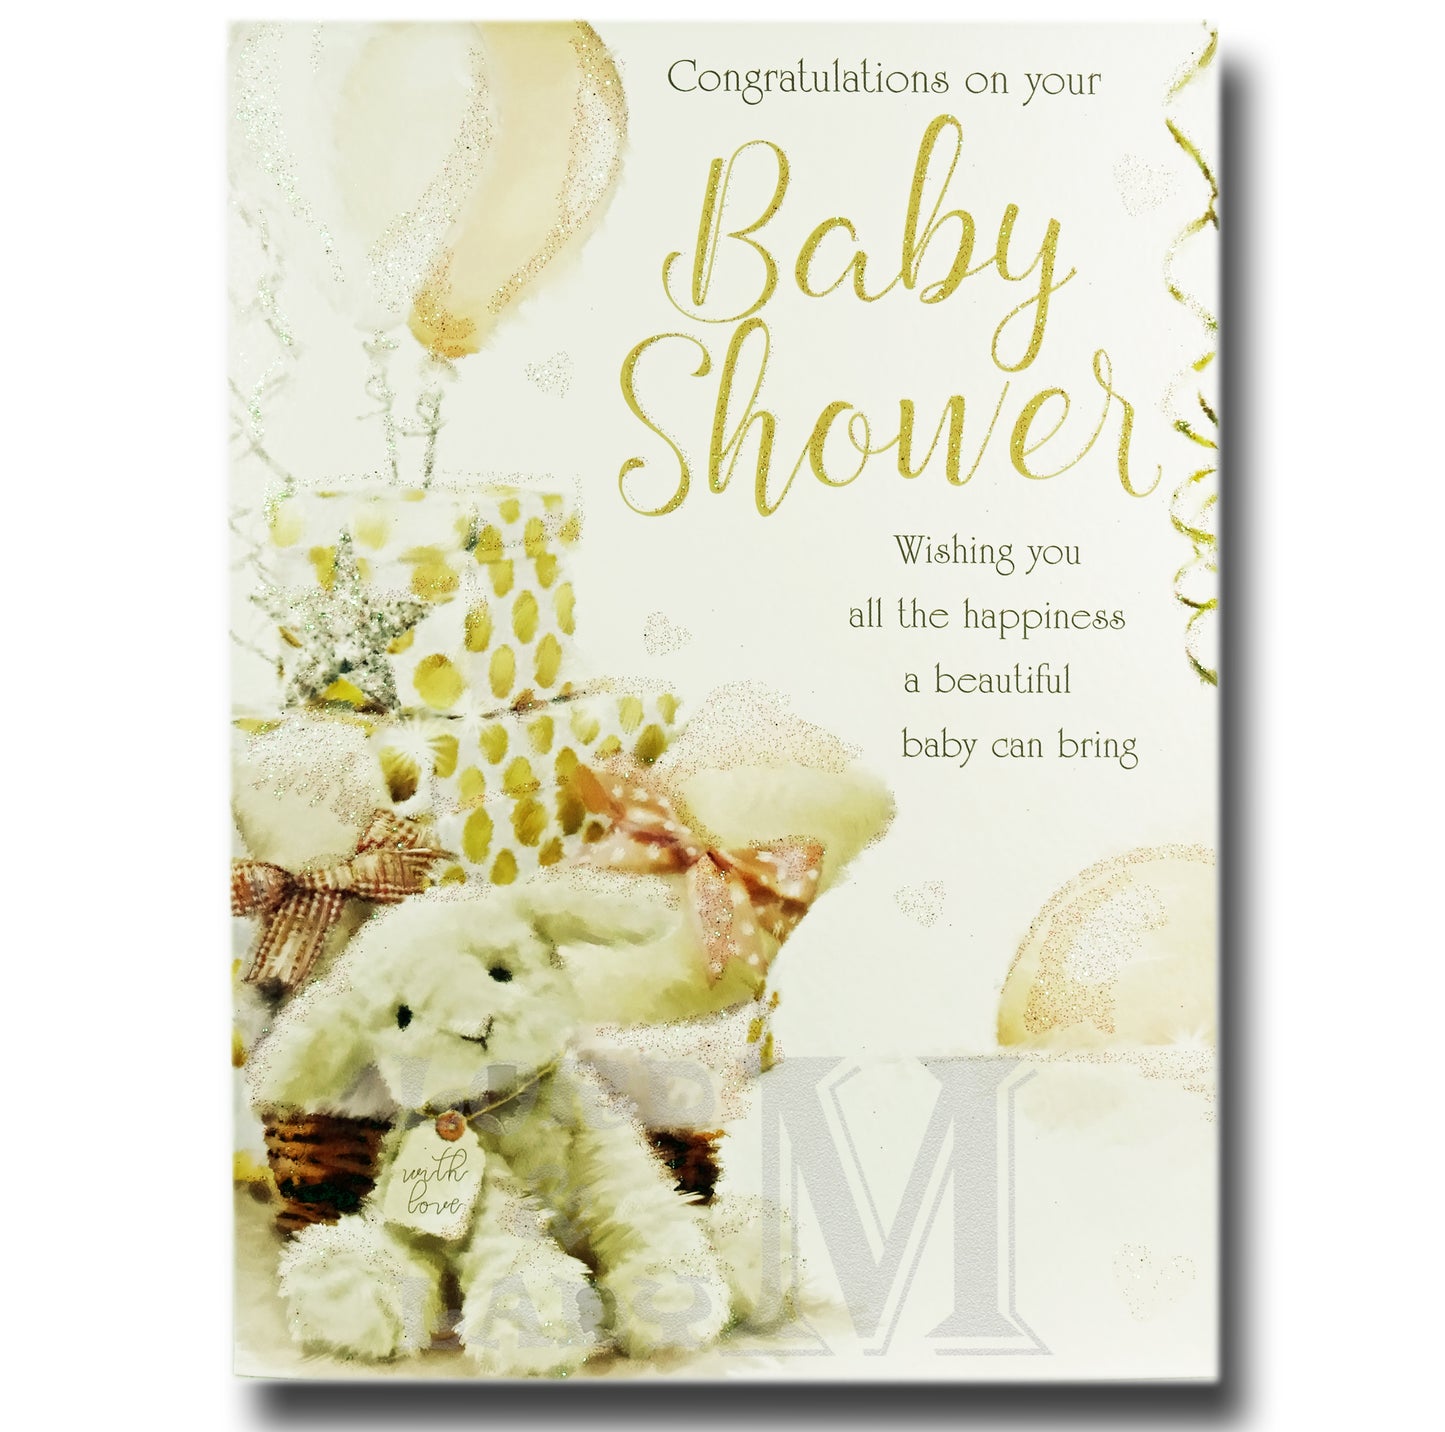 20cm - Congratulations On Your Baby Shower - DGC